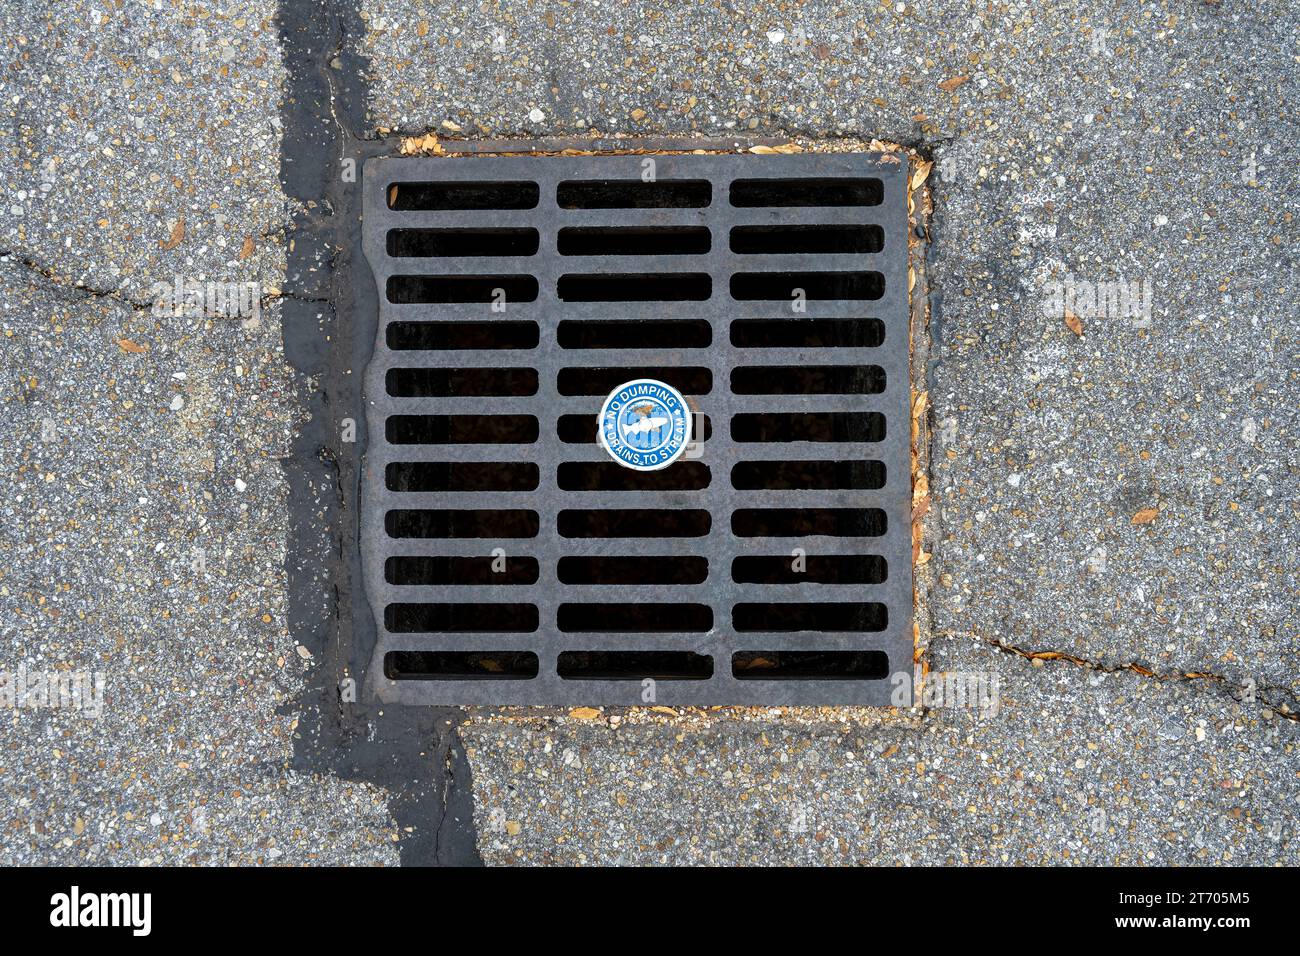 https://c8.alamy.com/comp/2T705M5/storm-drain-in-a-parking-lot-with-a-fish-symbol-that-indicates-the-drain-goes-into-a-nearby-stream-in-an-effort-to-be-environmentally-safe-2T705M5.jpg